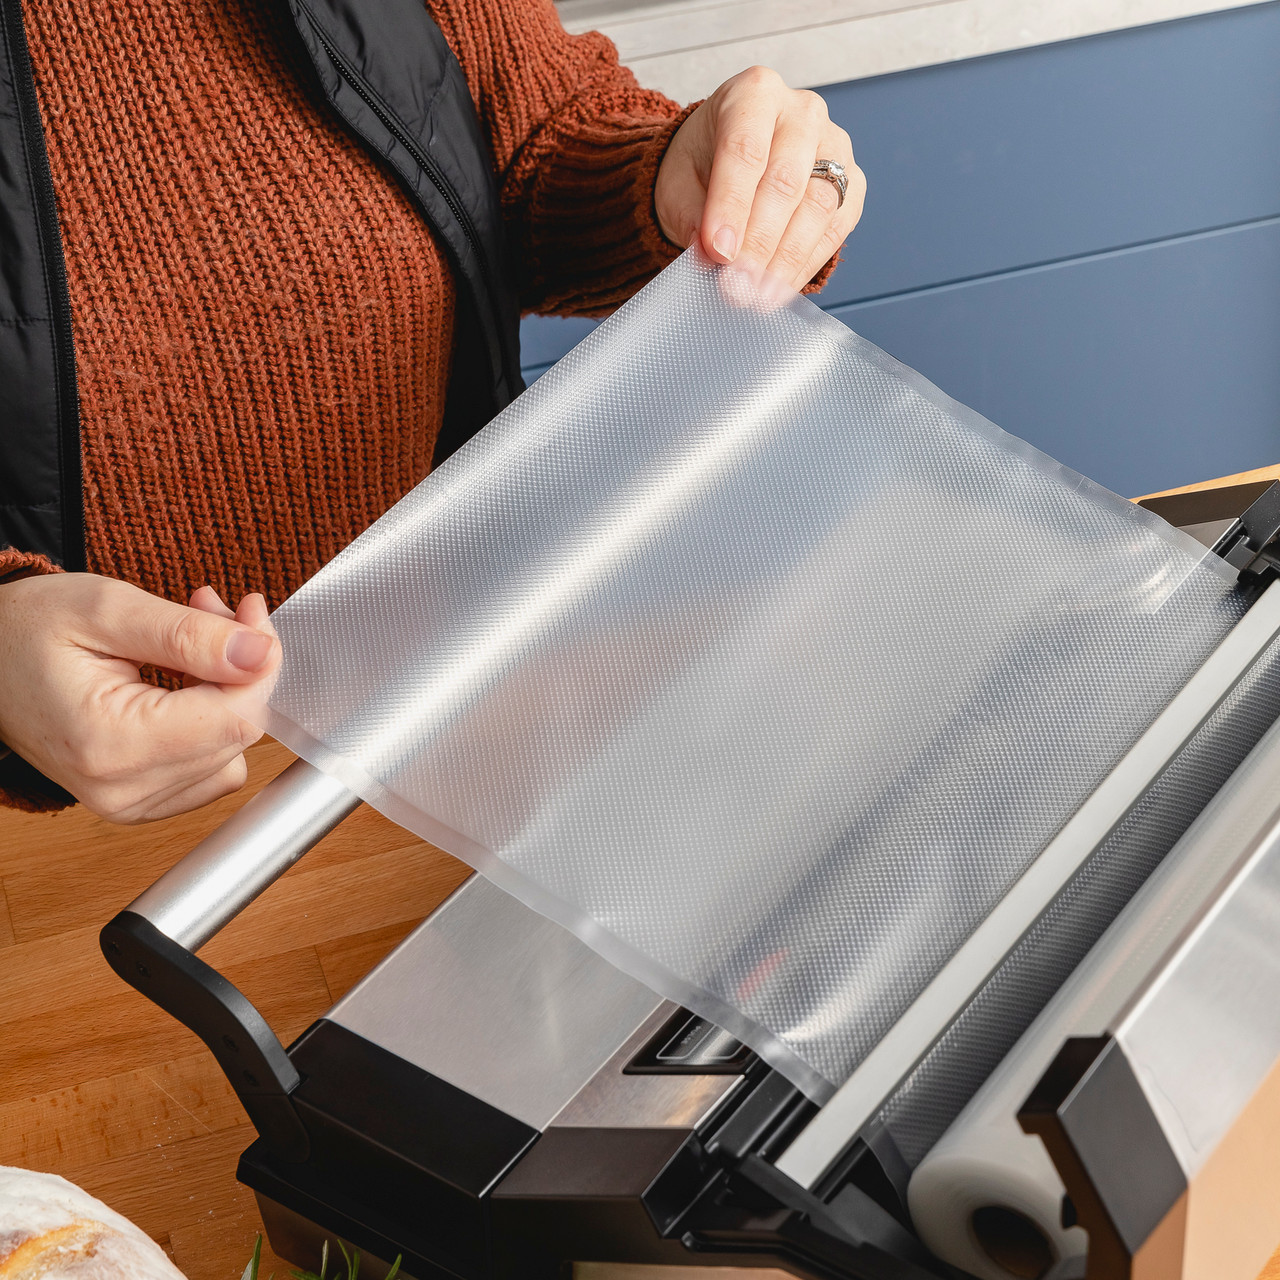 NEW to Avid Armor: Convenient 20 Foot Vacuum Sealer Rolls to Fit Roll  Storage Area - Avid Armor